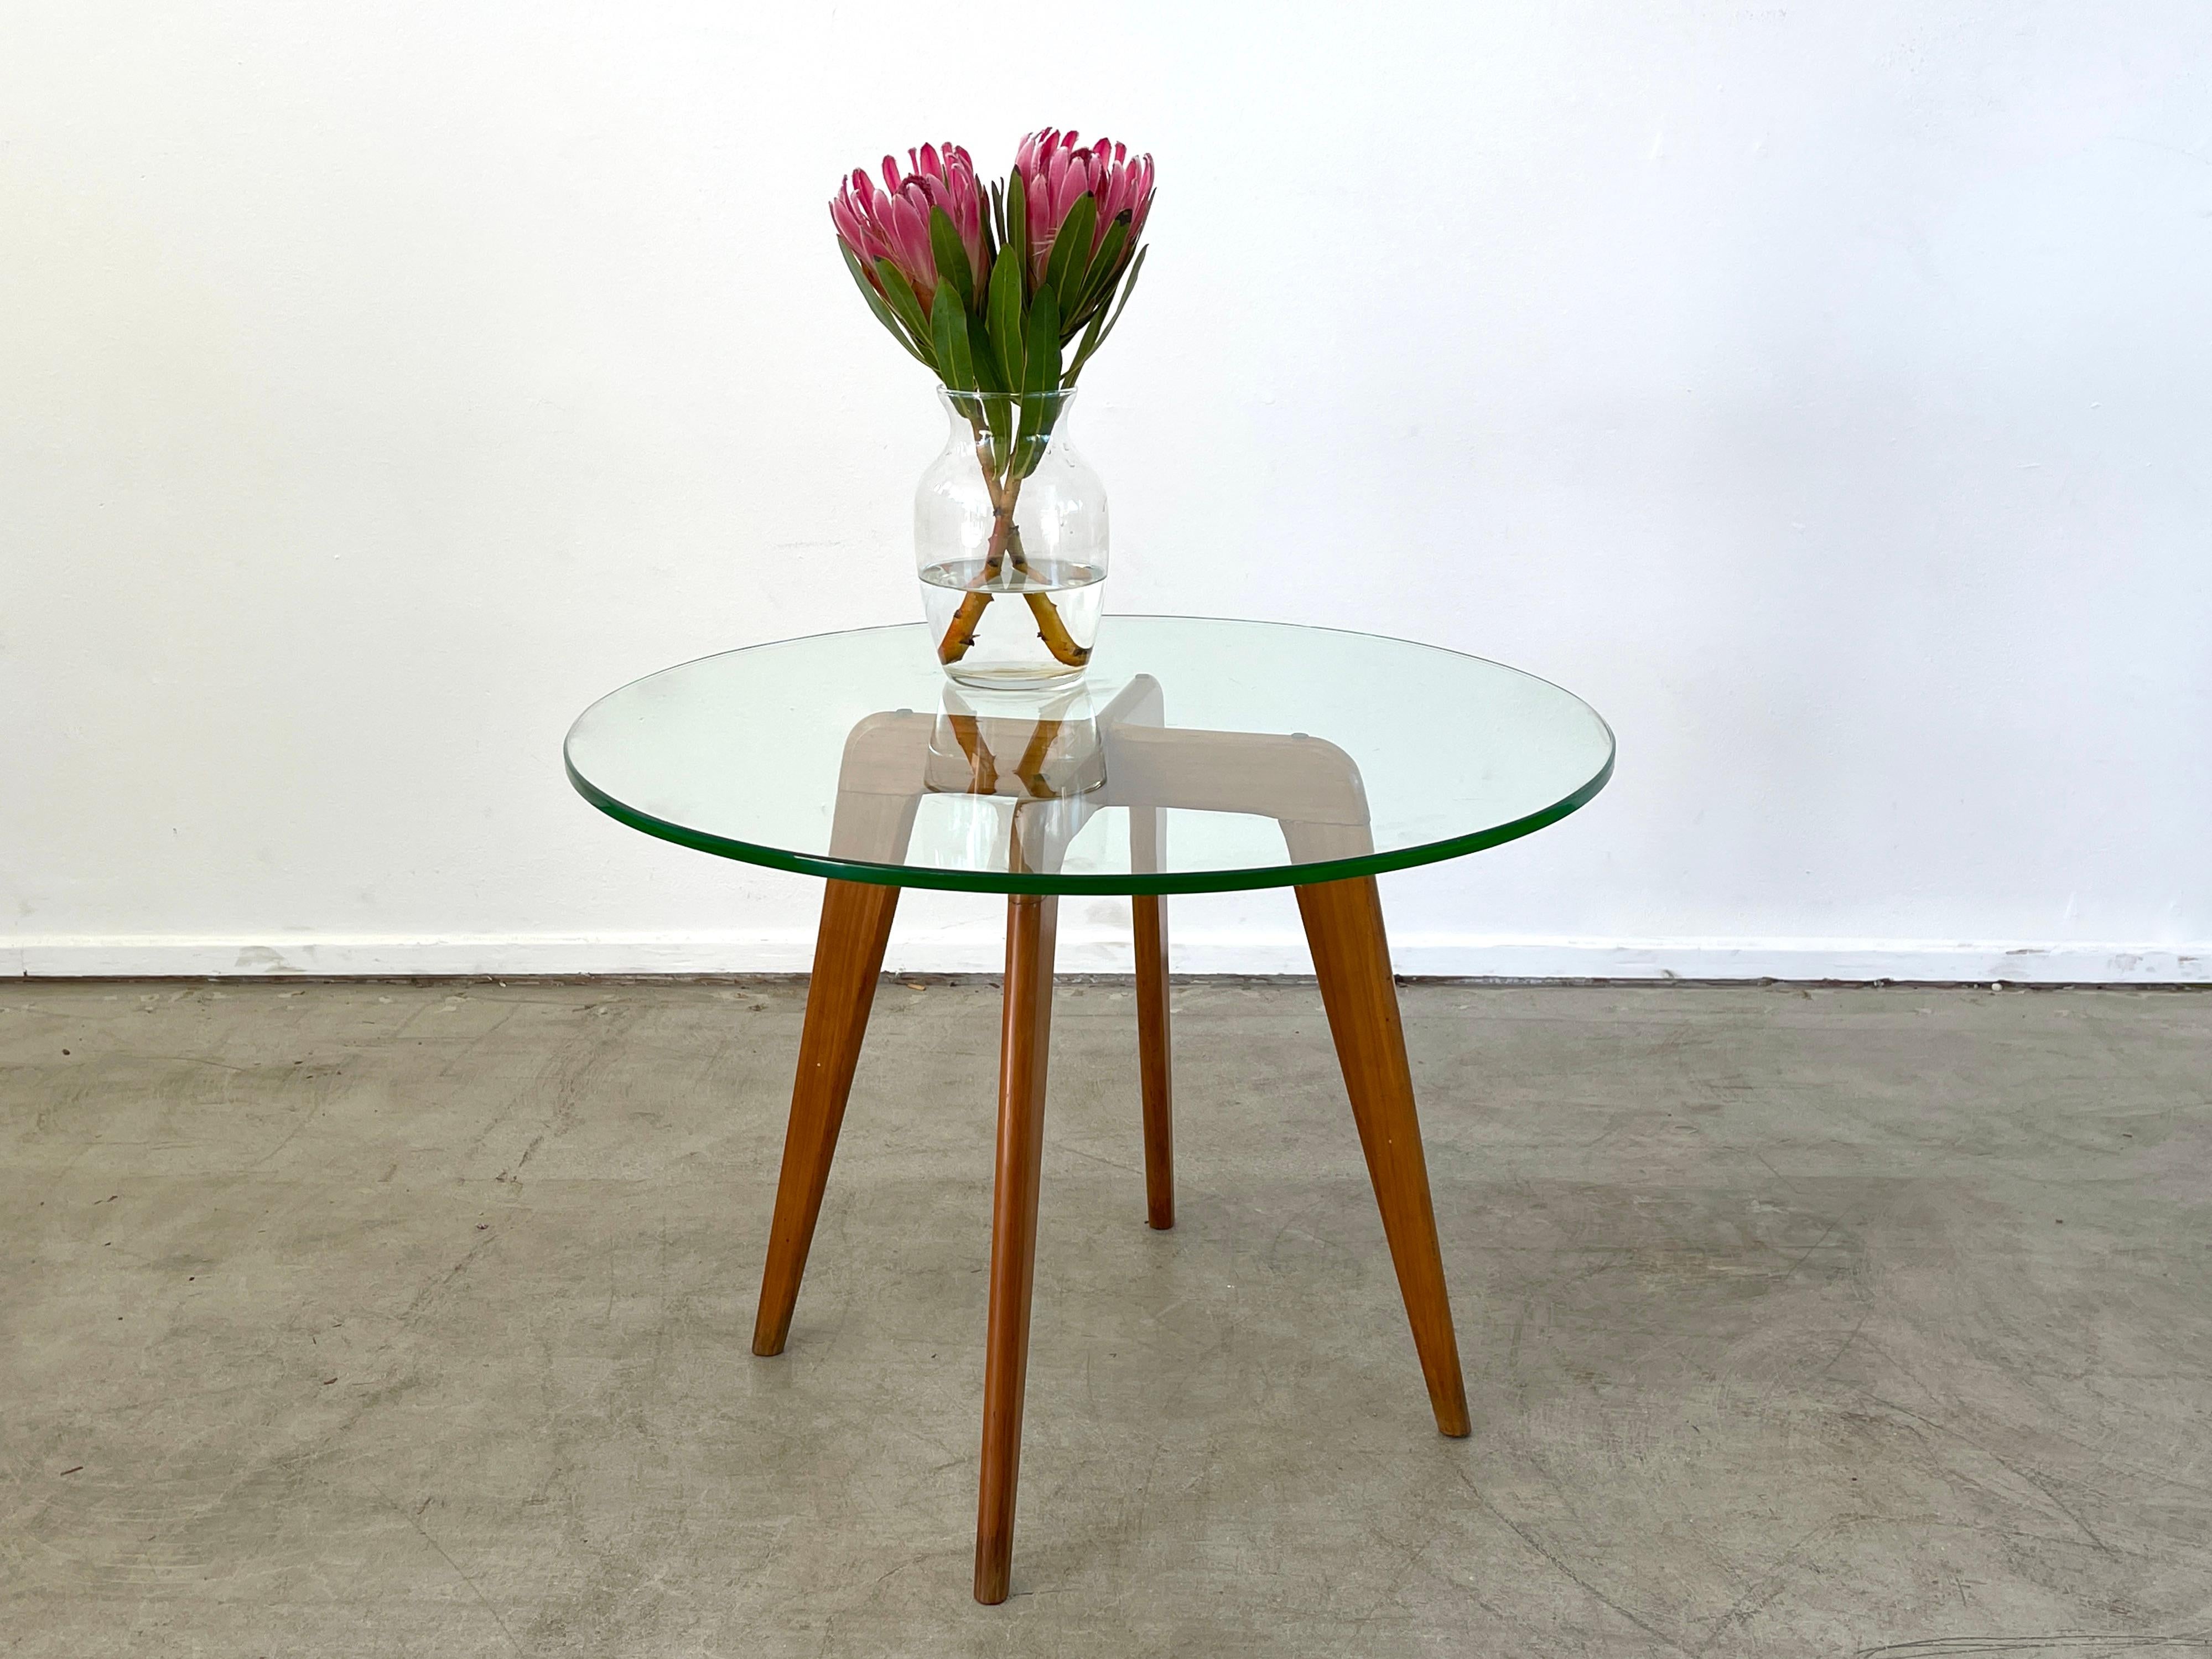 Classic 1950's Italian side table with glass top and tapered legs. 
Great simple design.